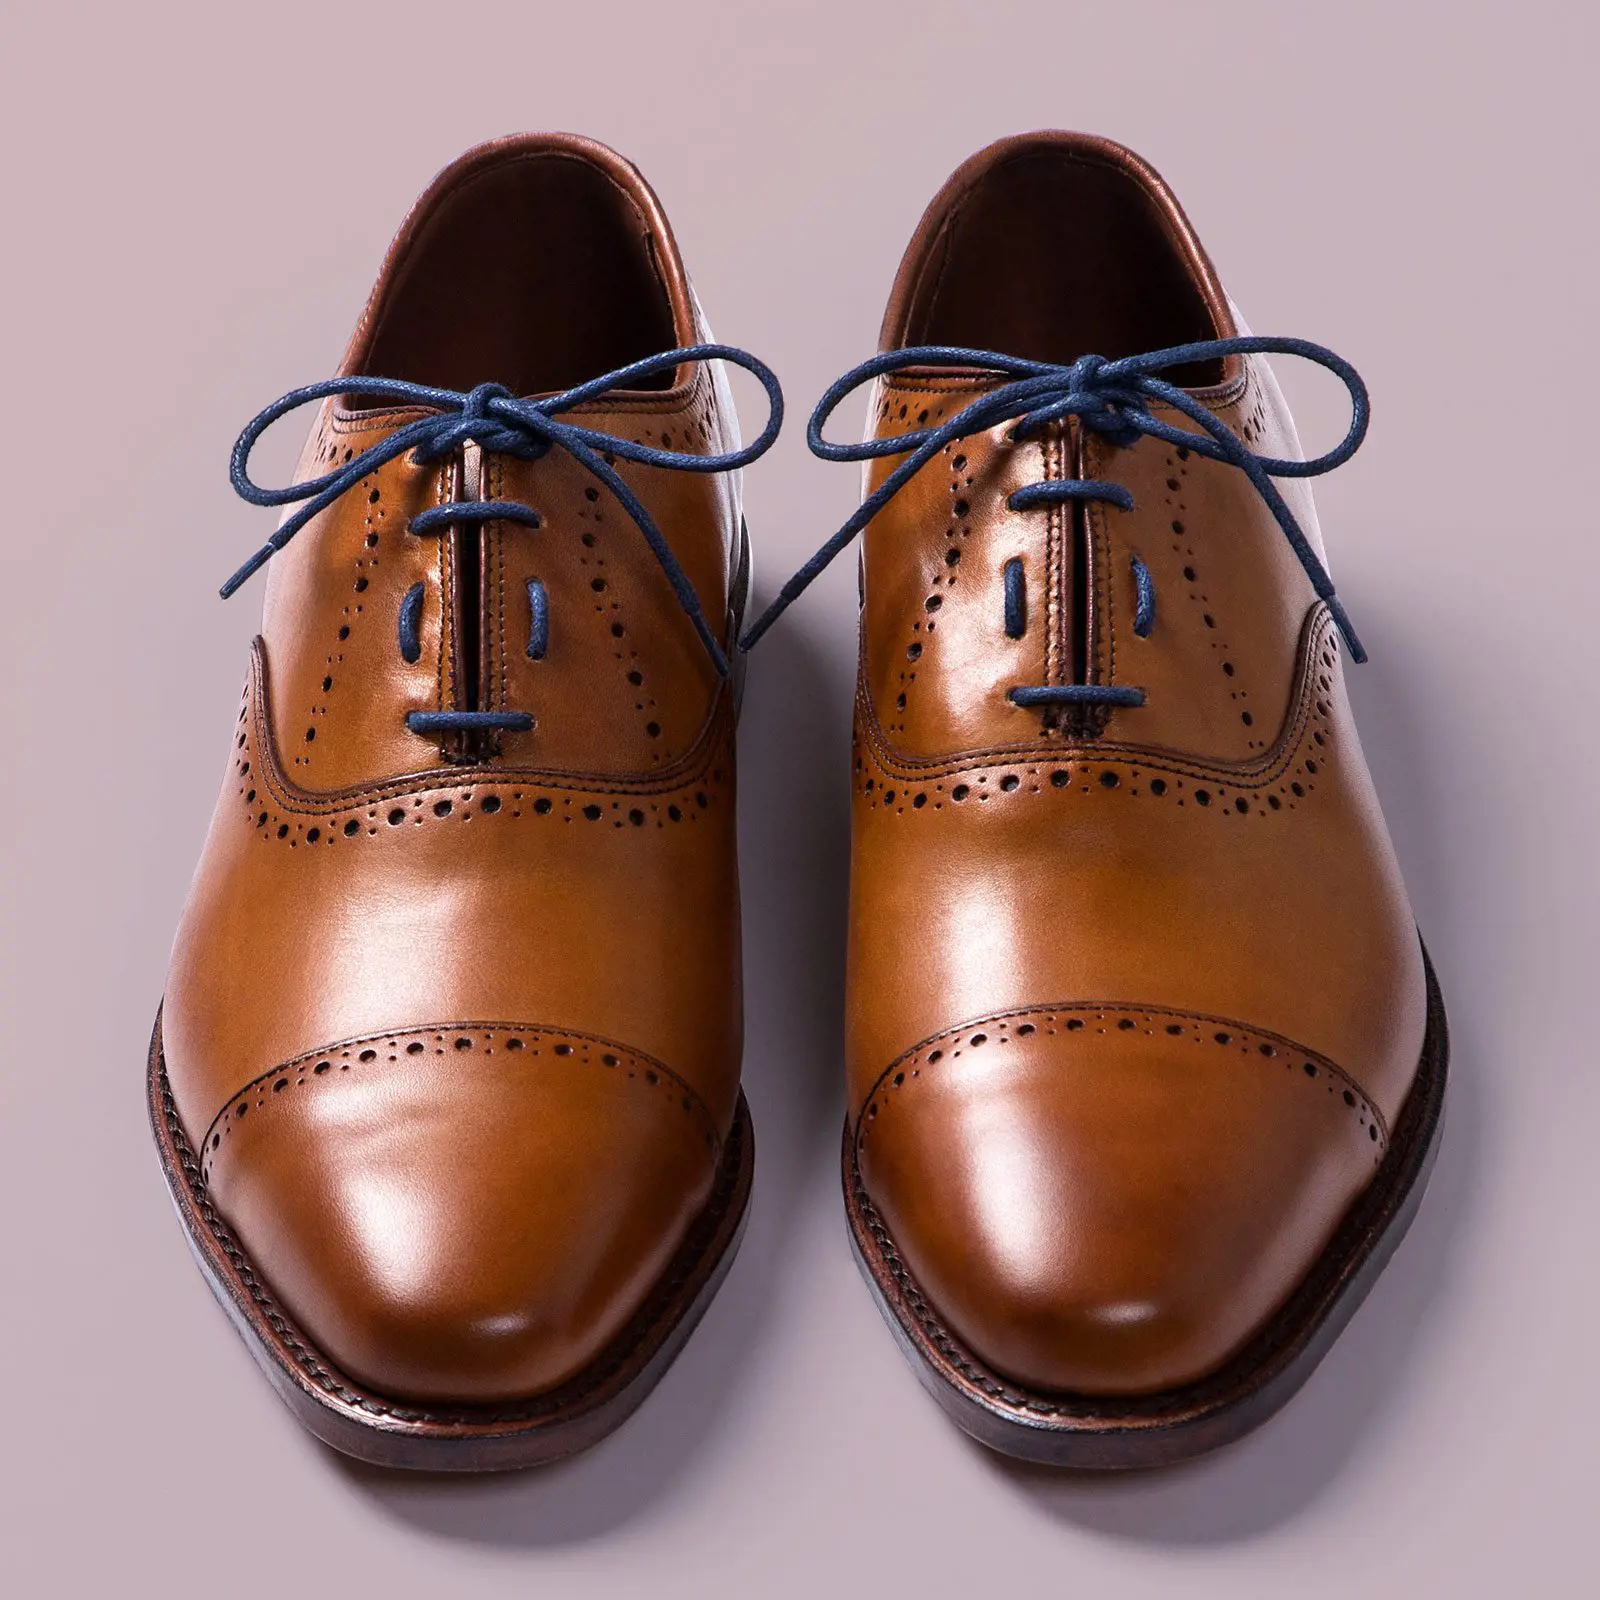 The Perfect Guide On Lacing Dress Shoes With A Straight Bar | ShunVogue